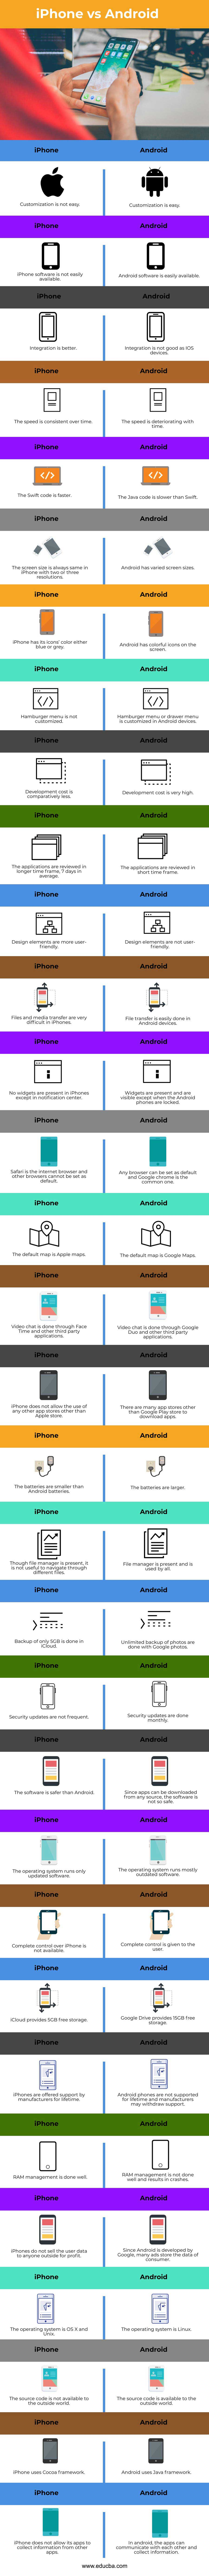 iPhone vs Android info